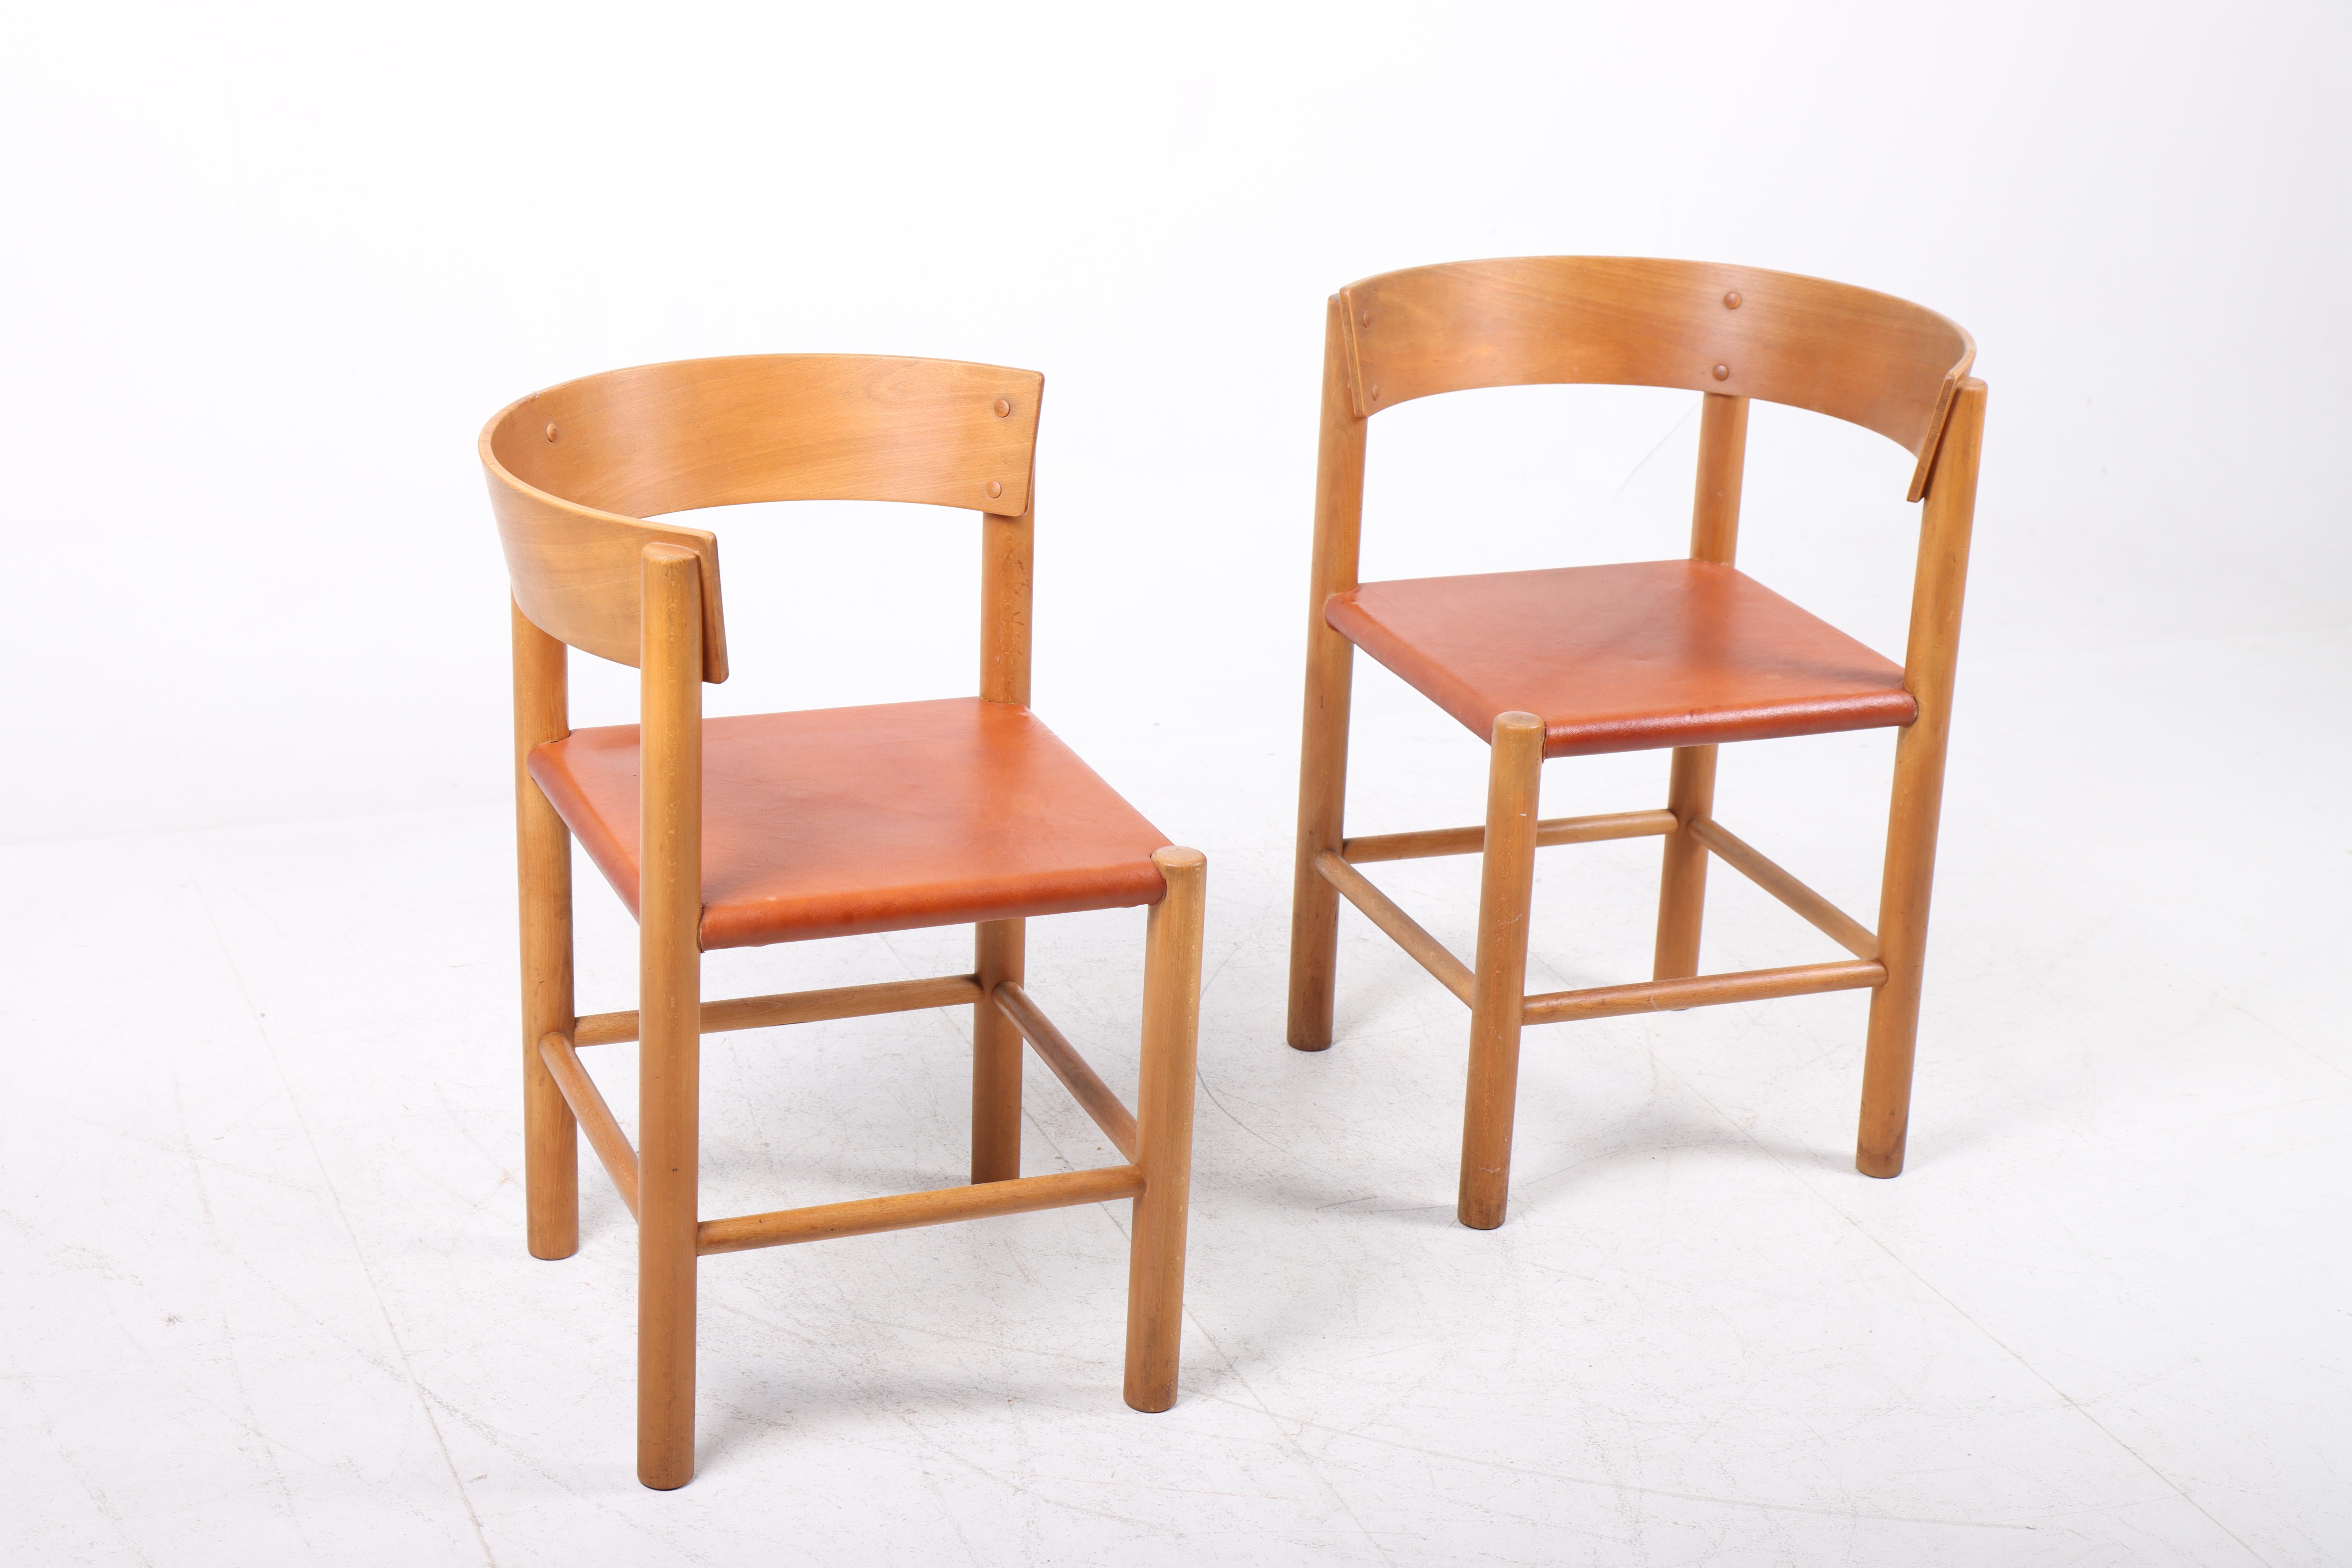 Scandinavian Modern Pair of Mid-Century Side Chairs in Patinated Leather by Mogens Lassen, 1960s